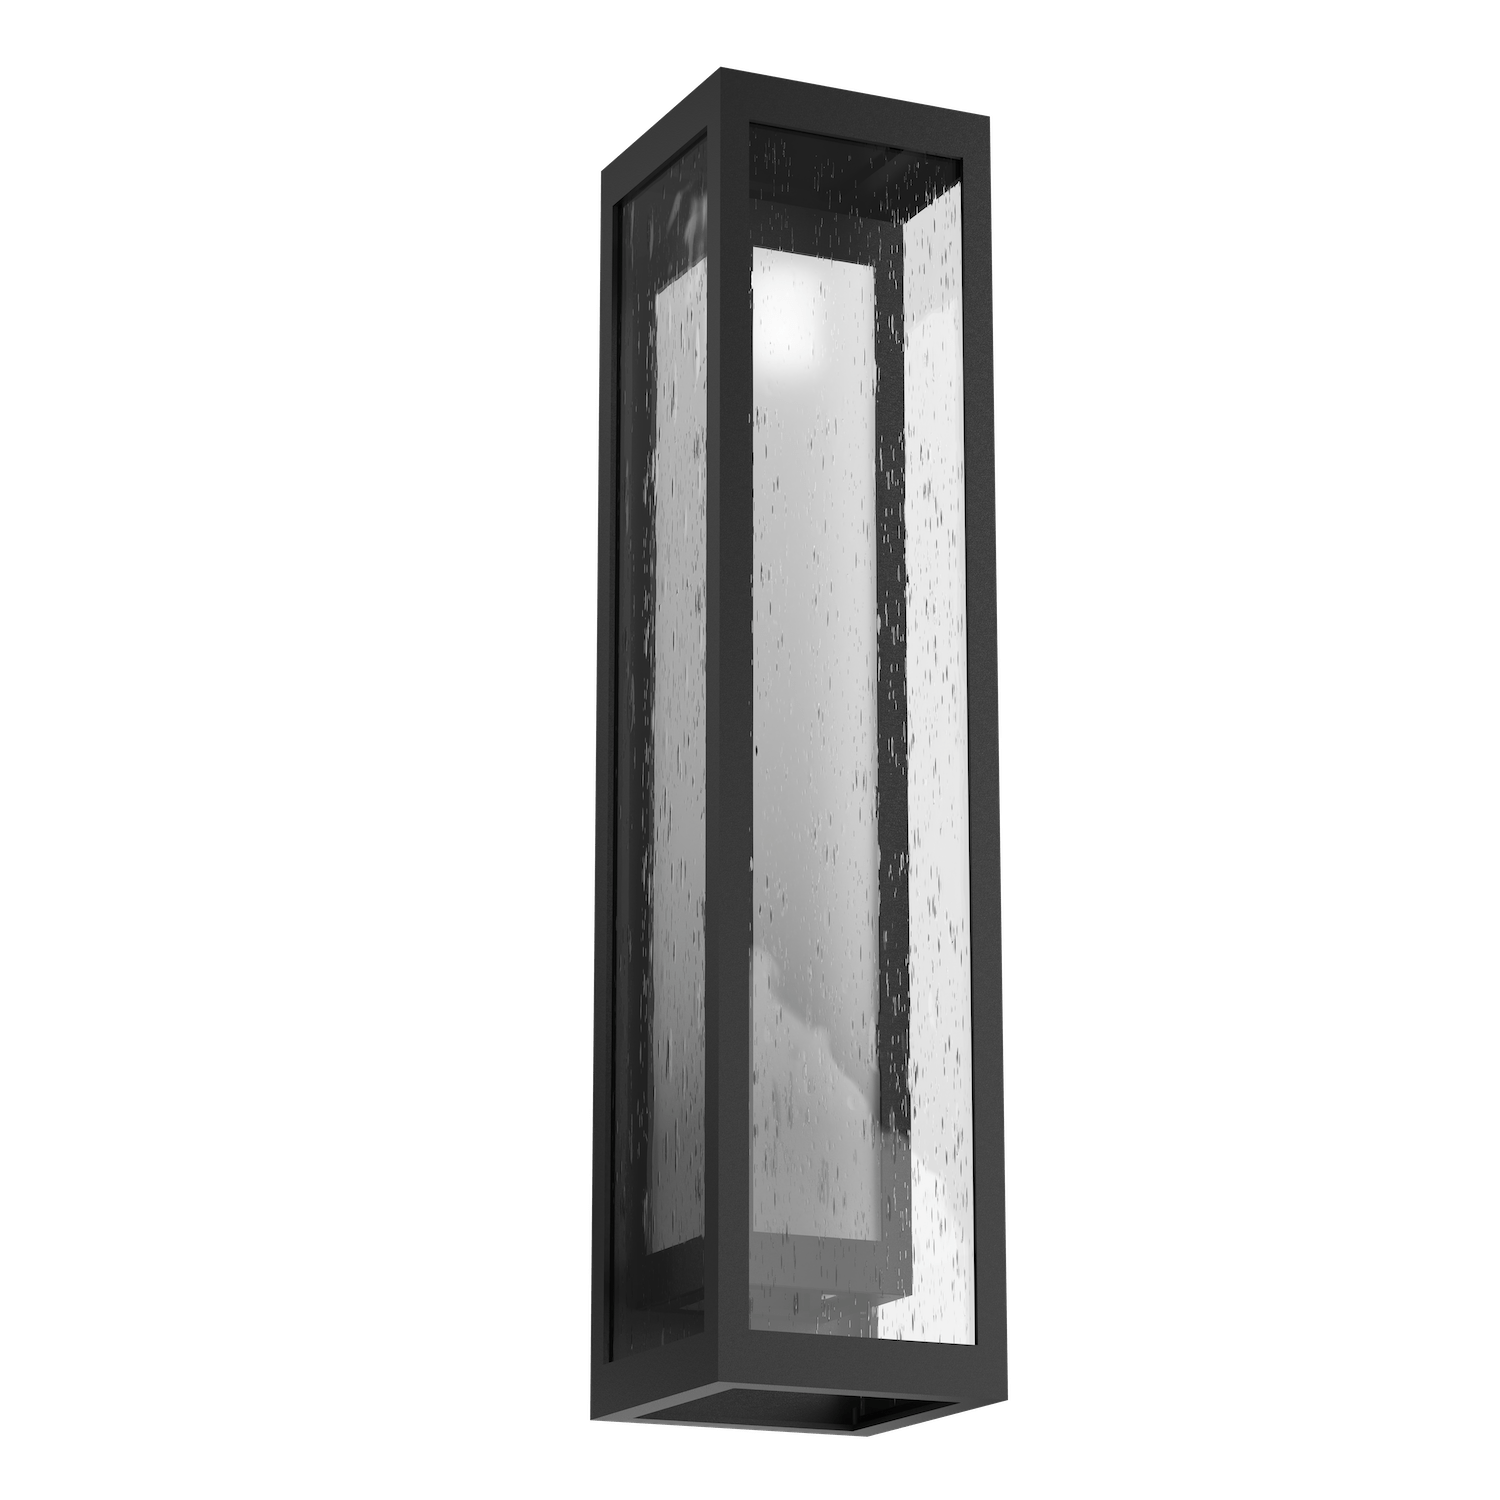 ODB0027-26-TB-F-Hammerton-Studio-Double-Box-26-inch-outdoor-sconce-with-textured-black-finish-and-frosted-glass-shade-and-LED-lamping